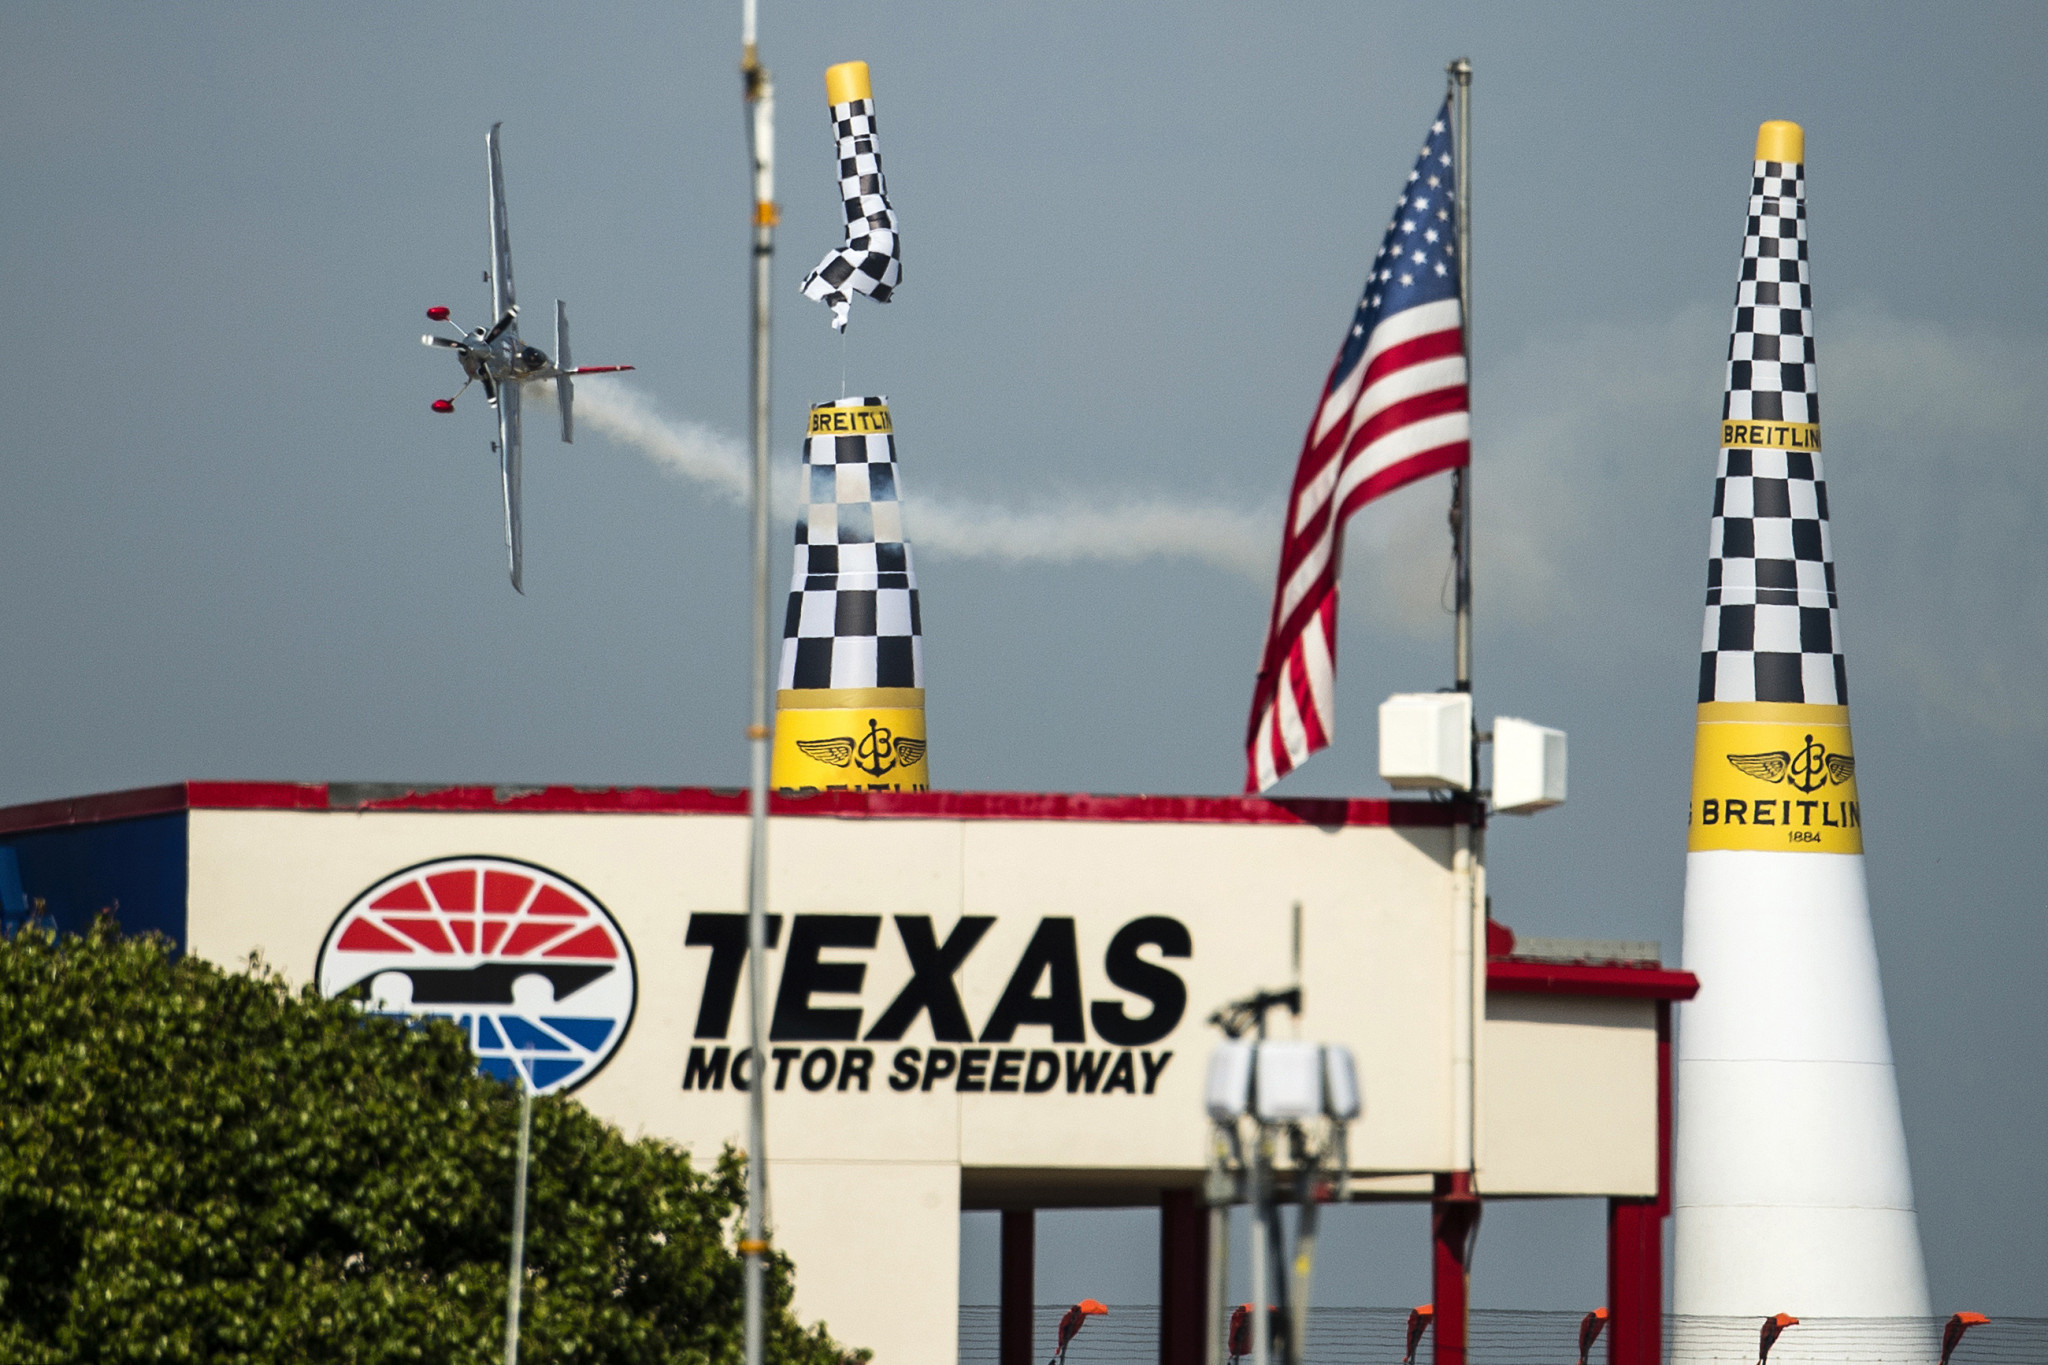 The 2018 Red Bull Air Race World Championship will be decided in Texas on Sunday ©Getty Images